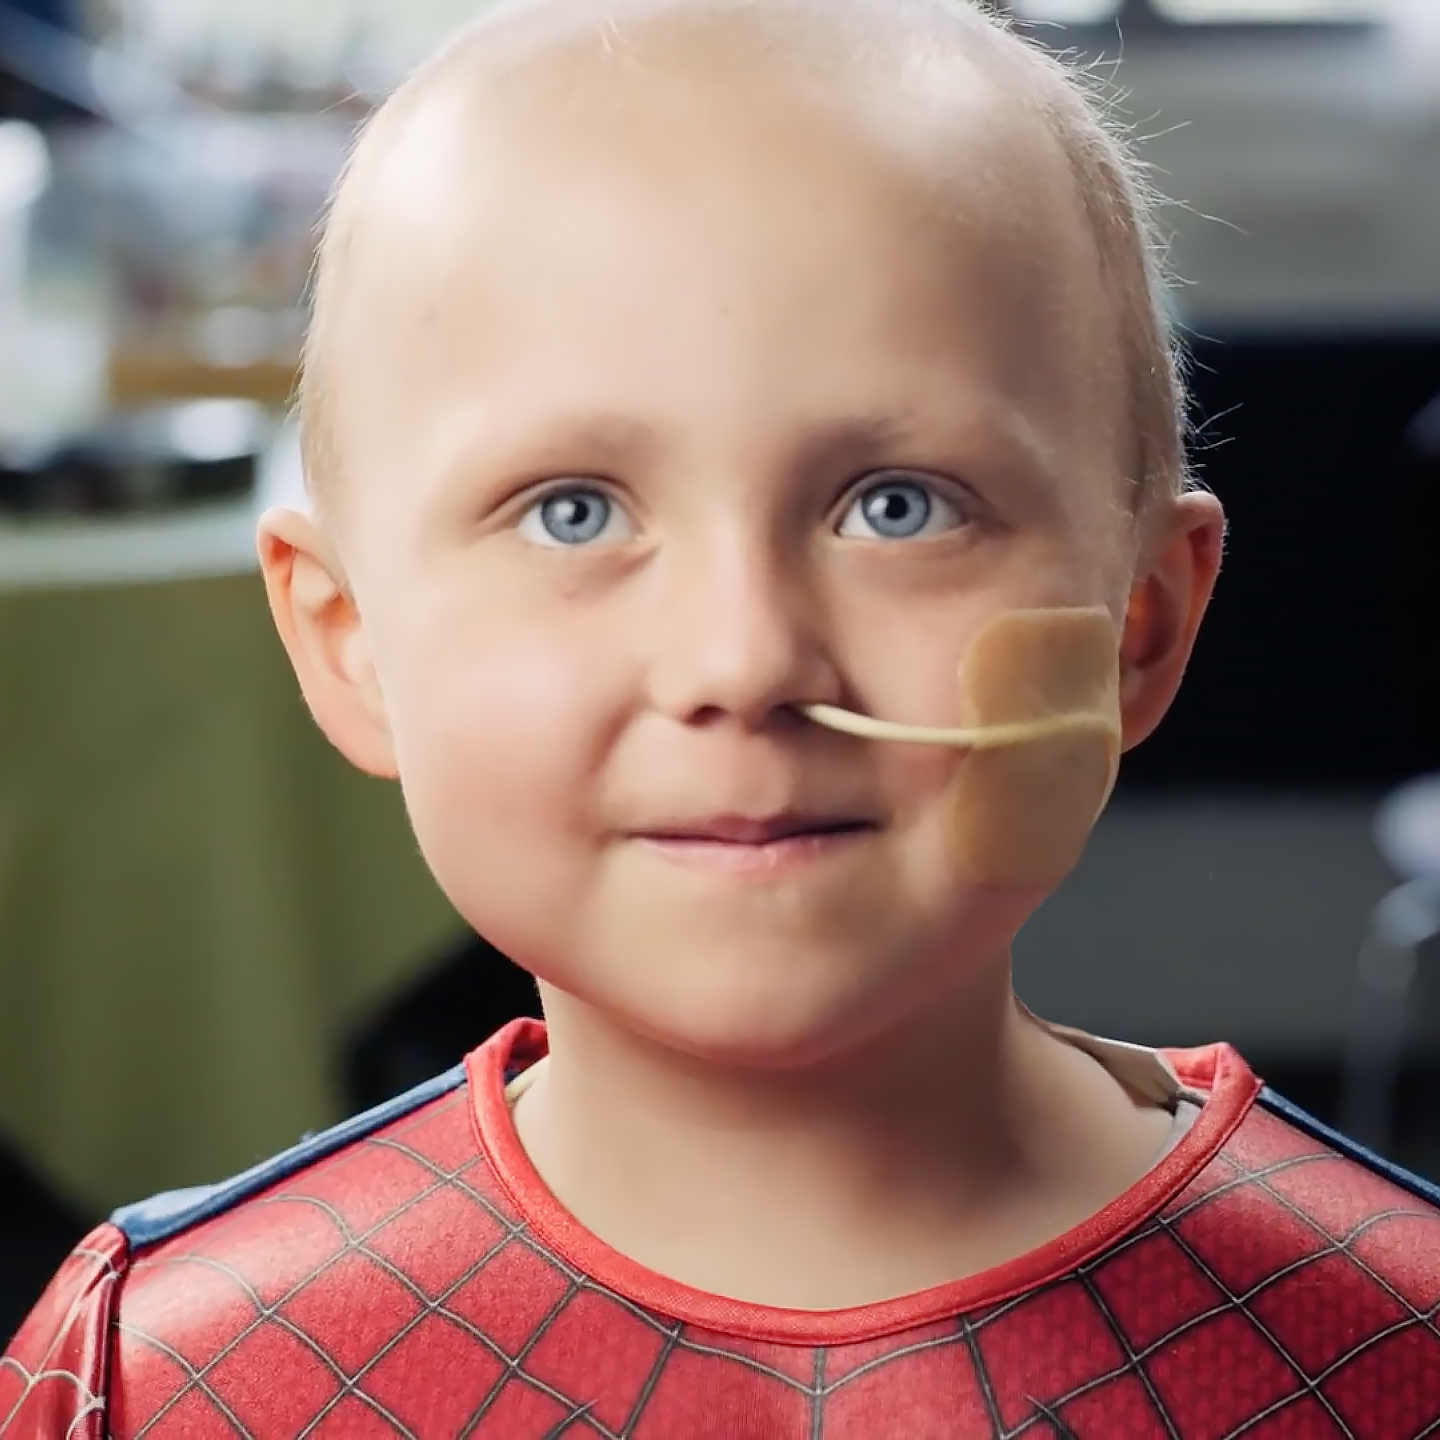 An Organization Driven by a Strong Cause of Beating Child Cancer